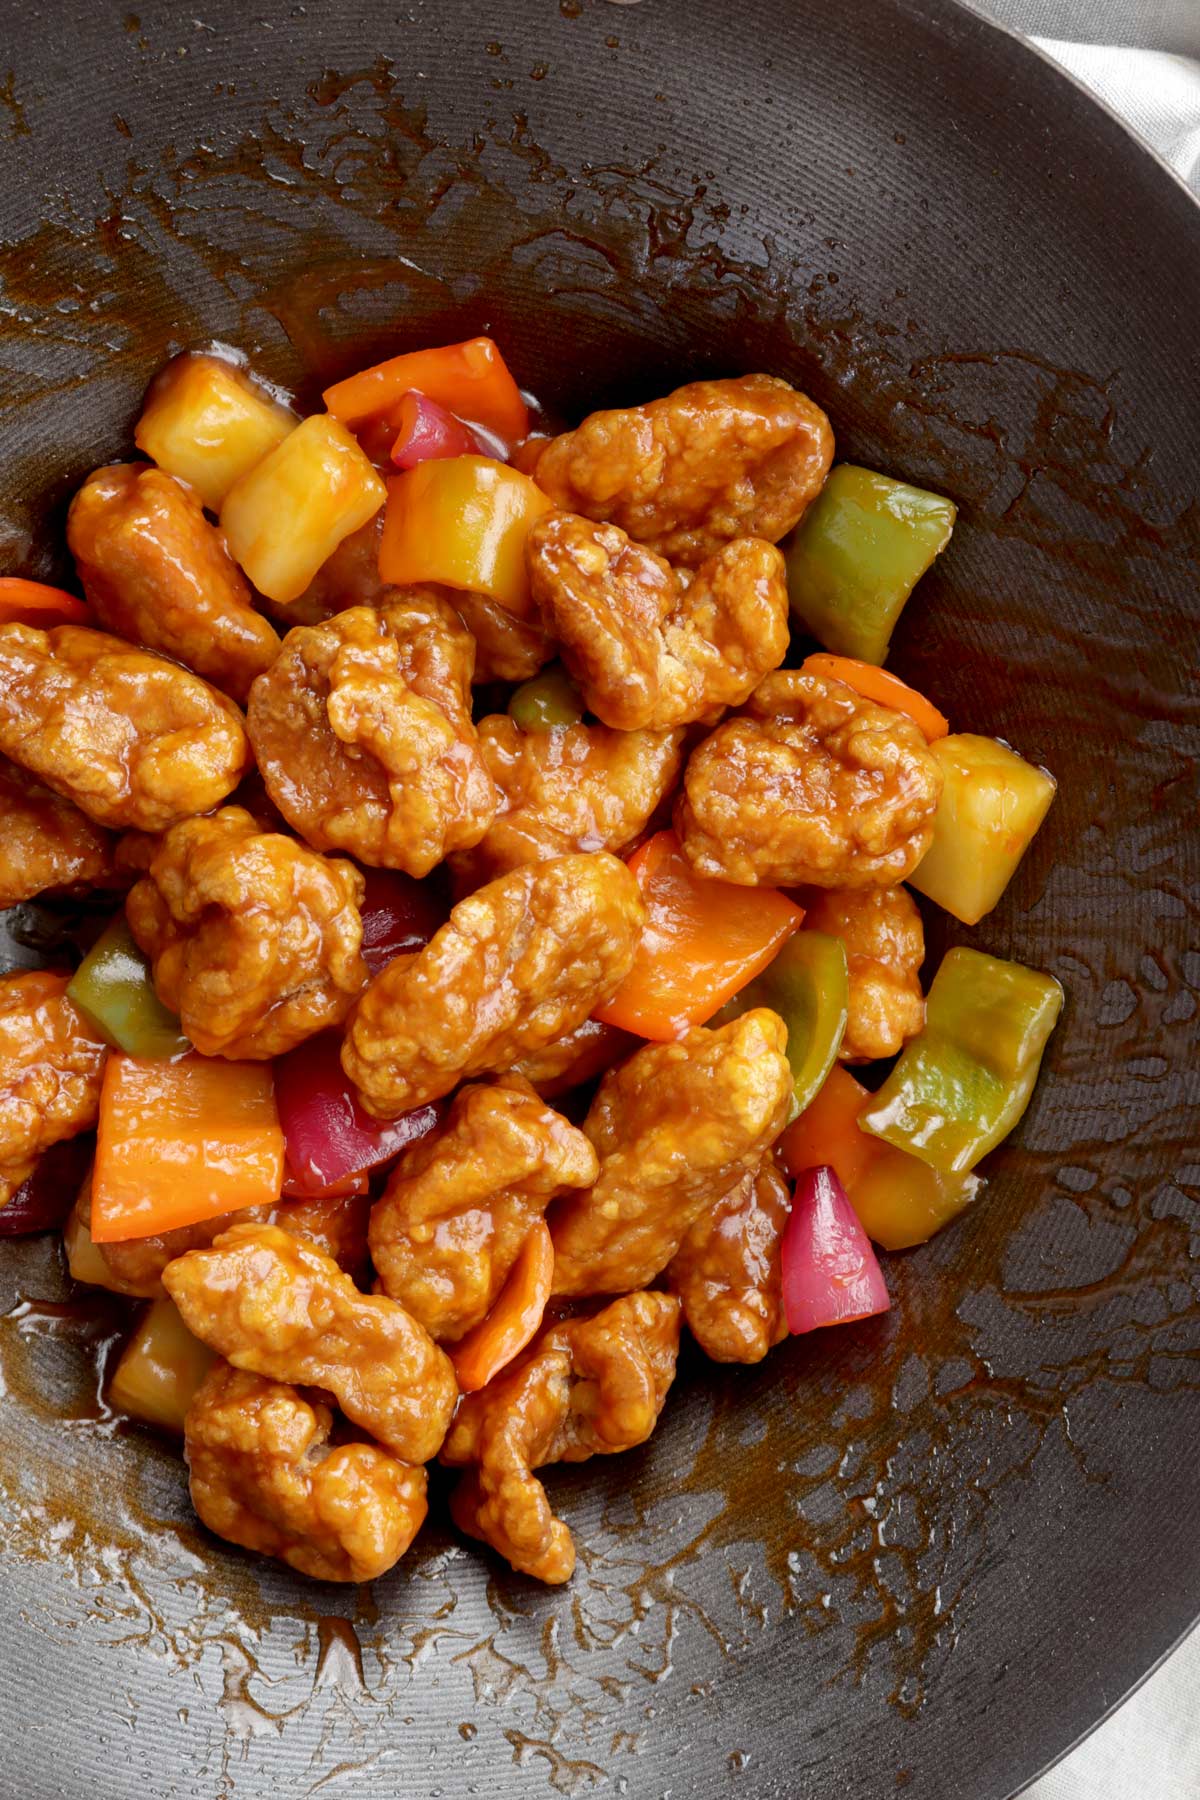 Freshly cooked sweet and sour pork in a wok.